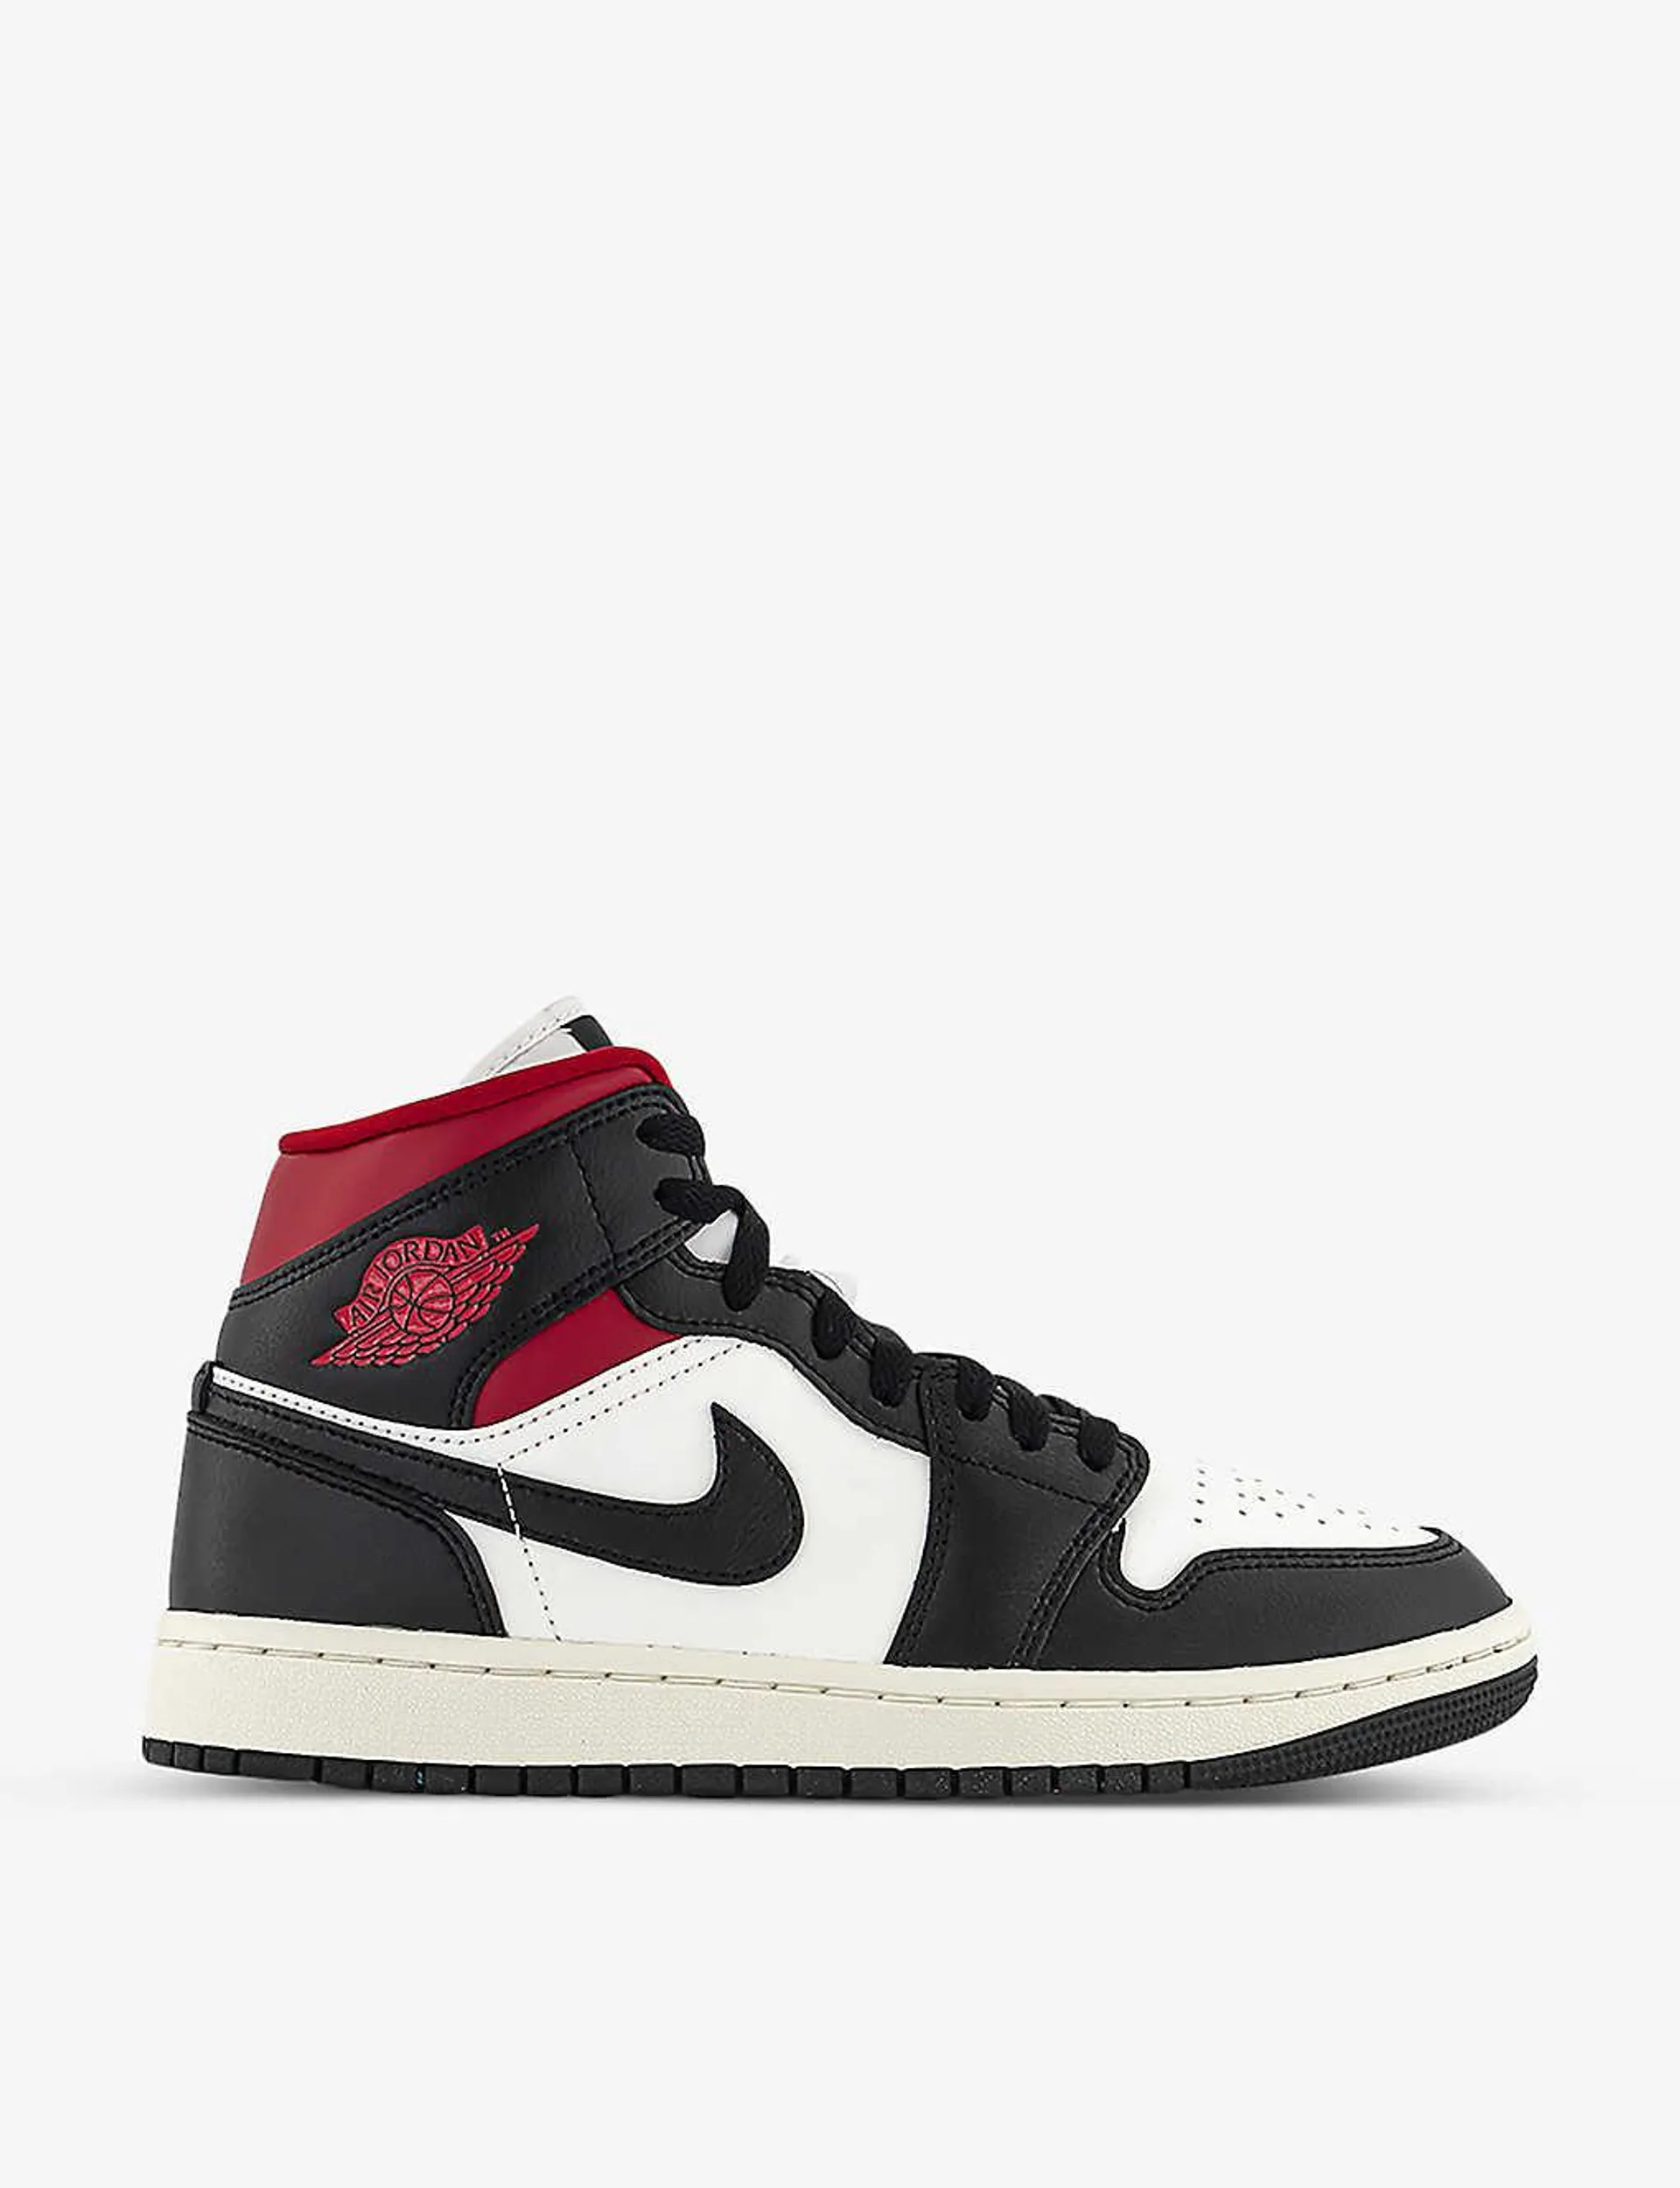 Air Jordan 1 Mid leather mid-top trainers